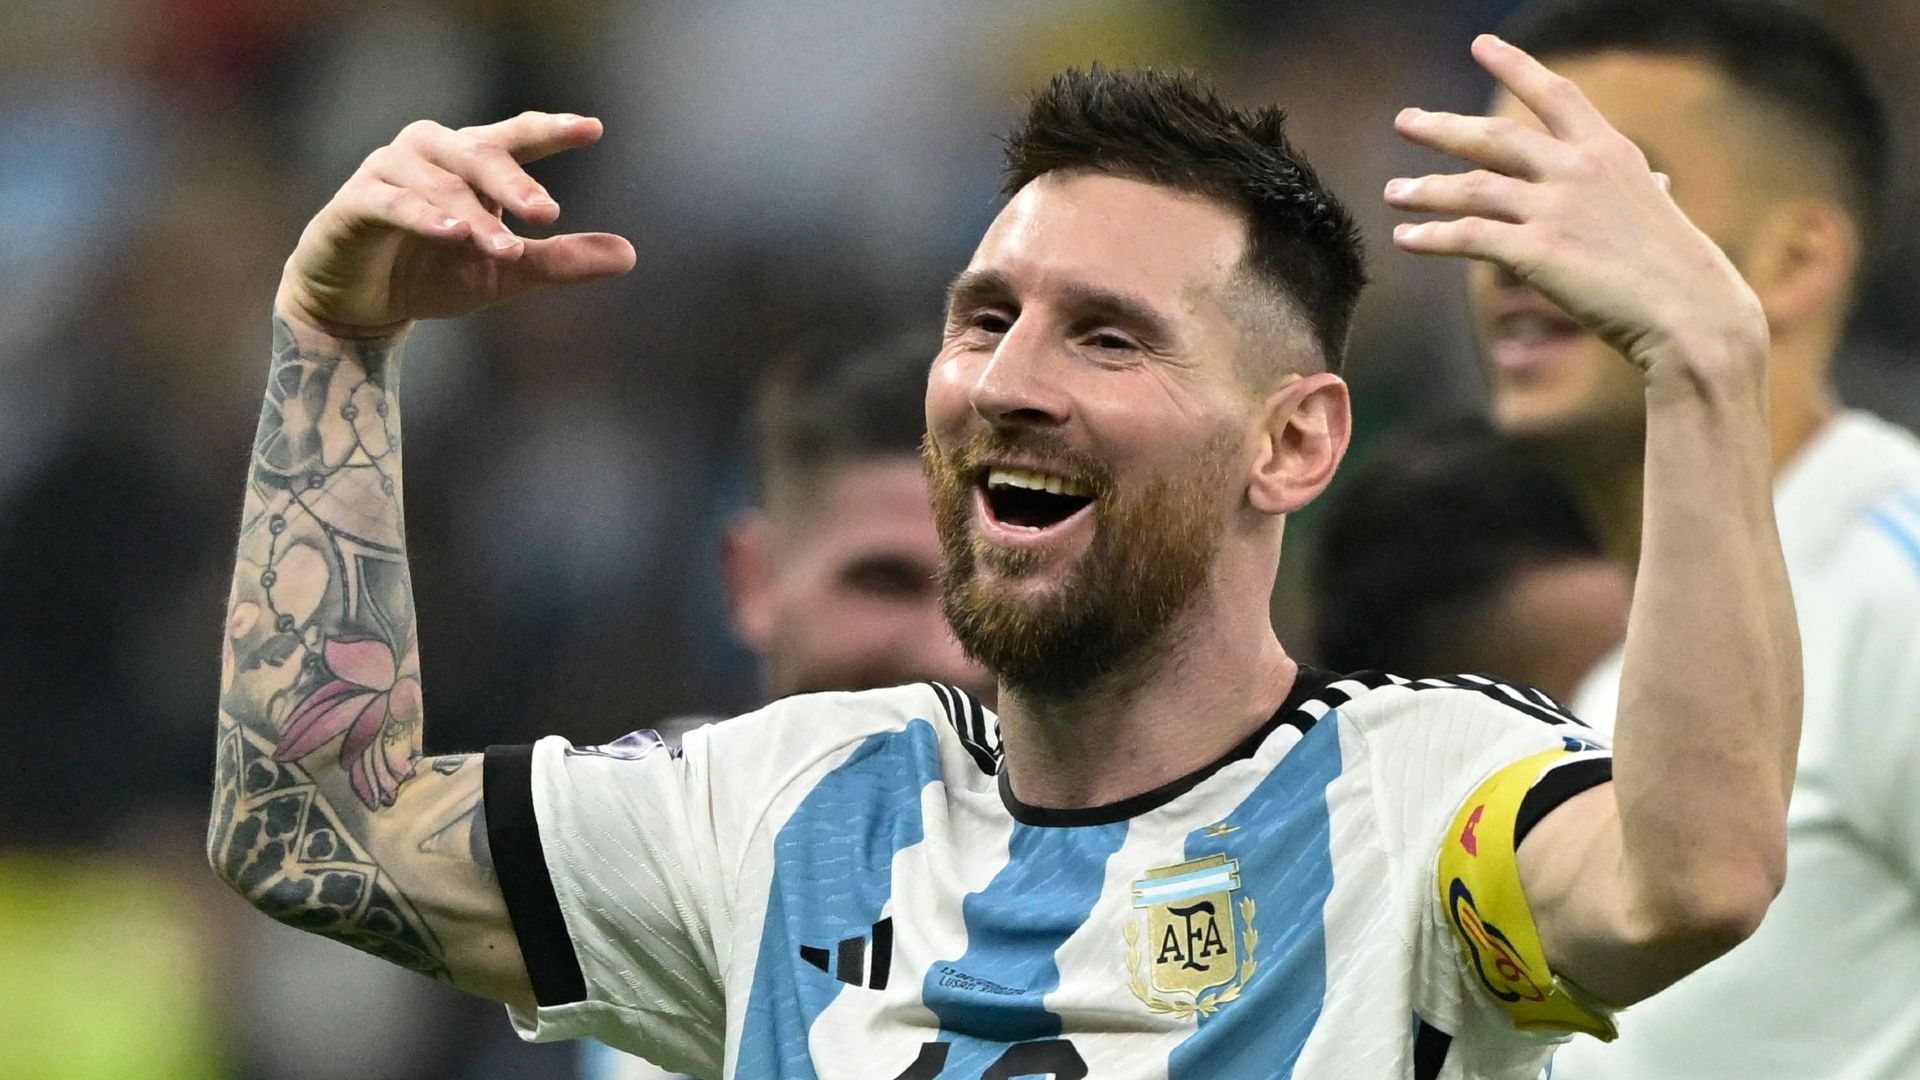 Messi becomes Santa Claus in new Argentine Christmas ad